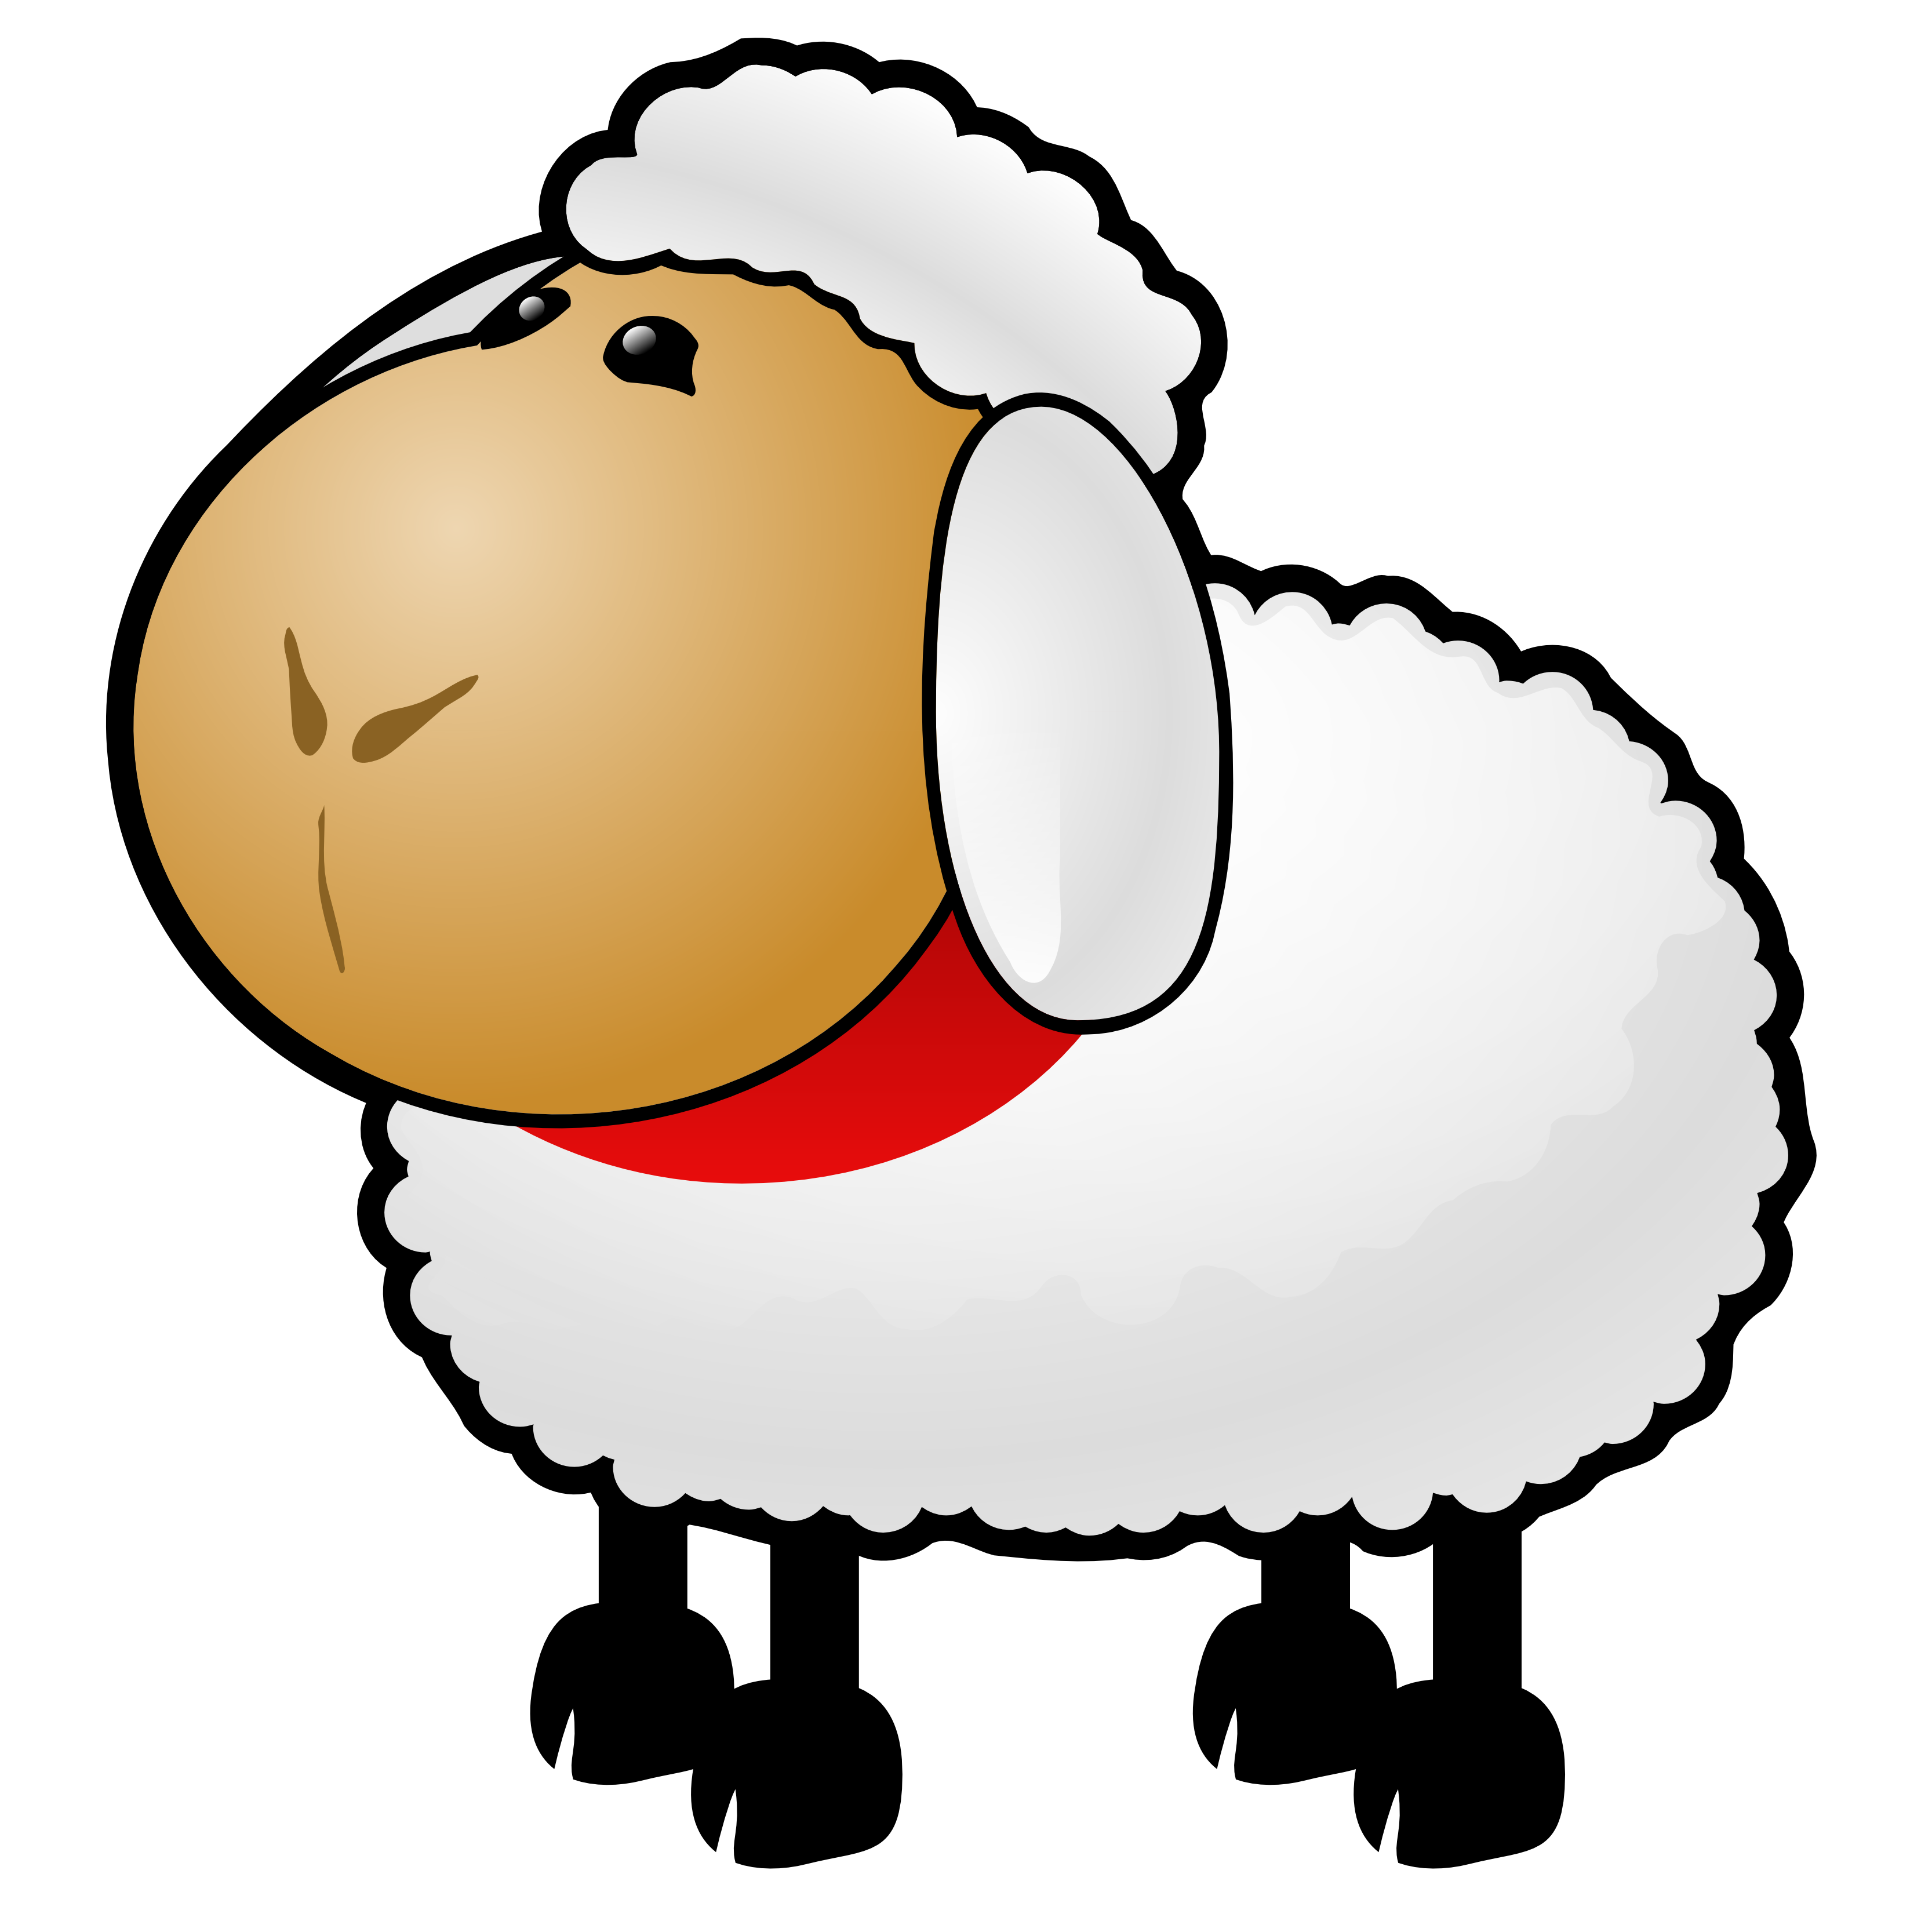 Sheep  black and white sheep lamb clipart black and white free images 2